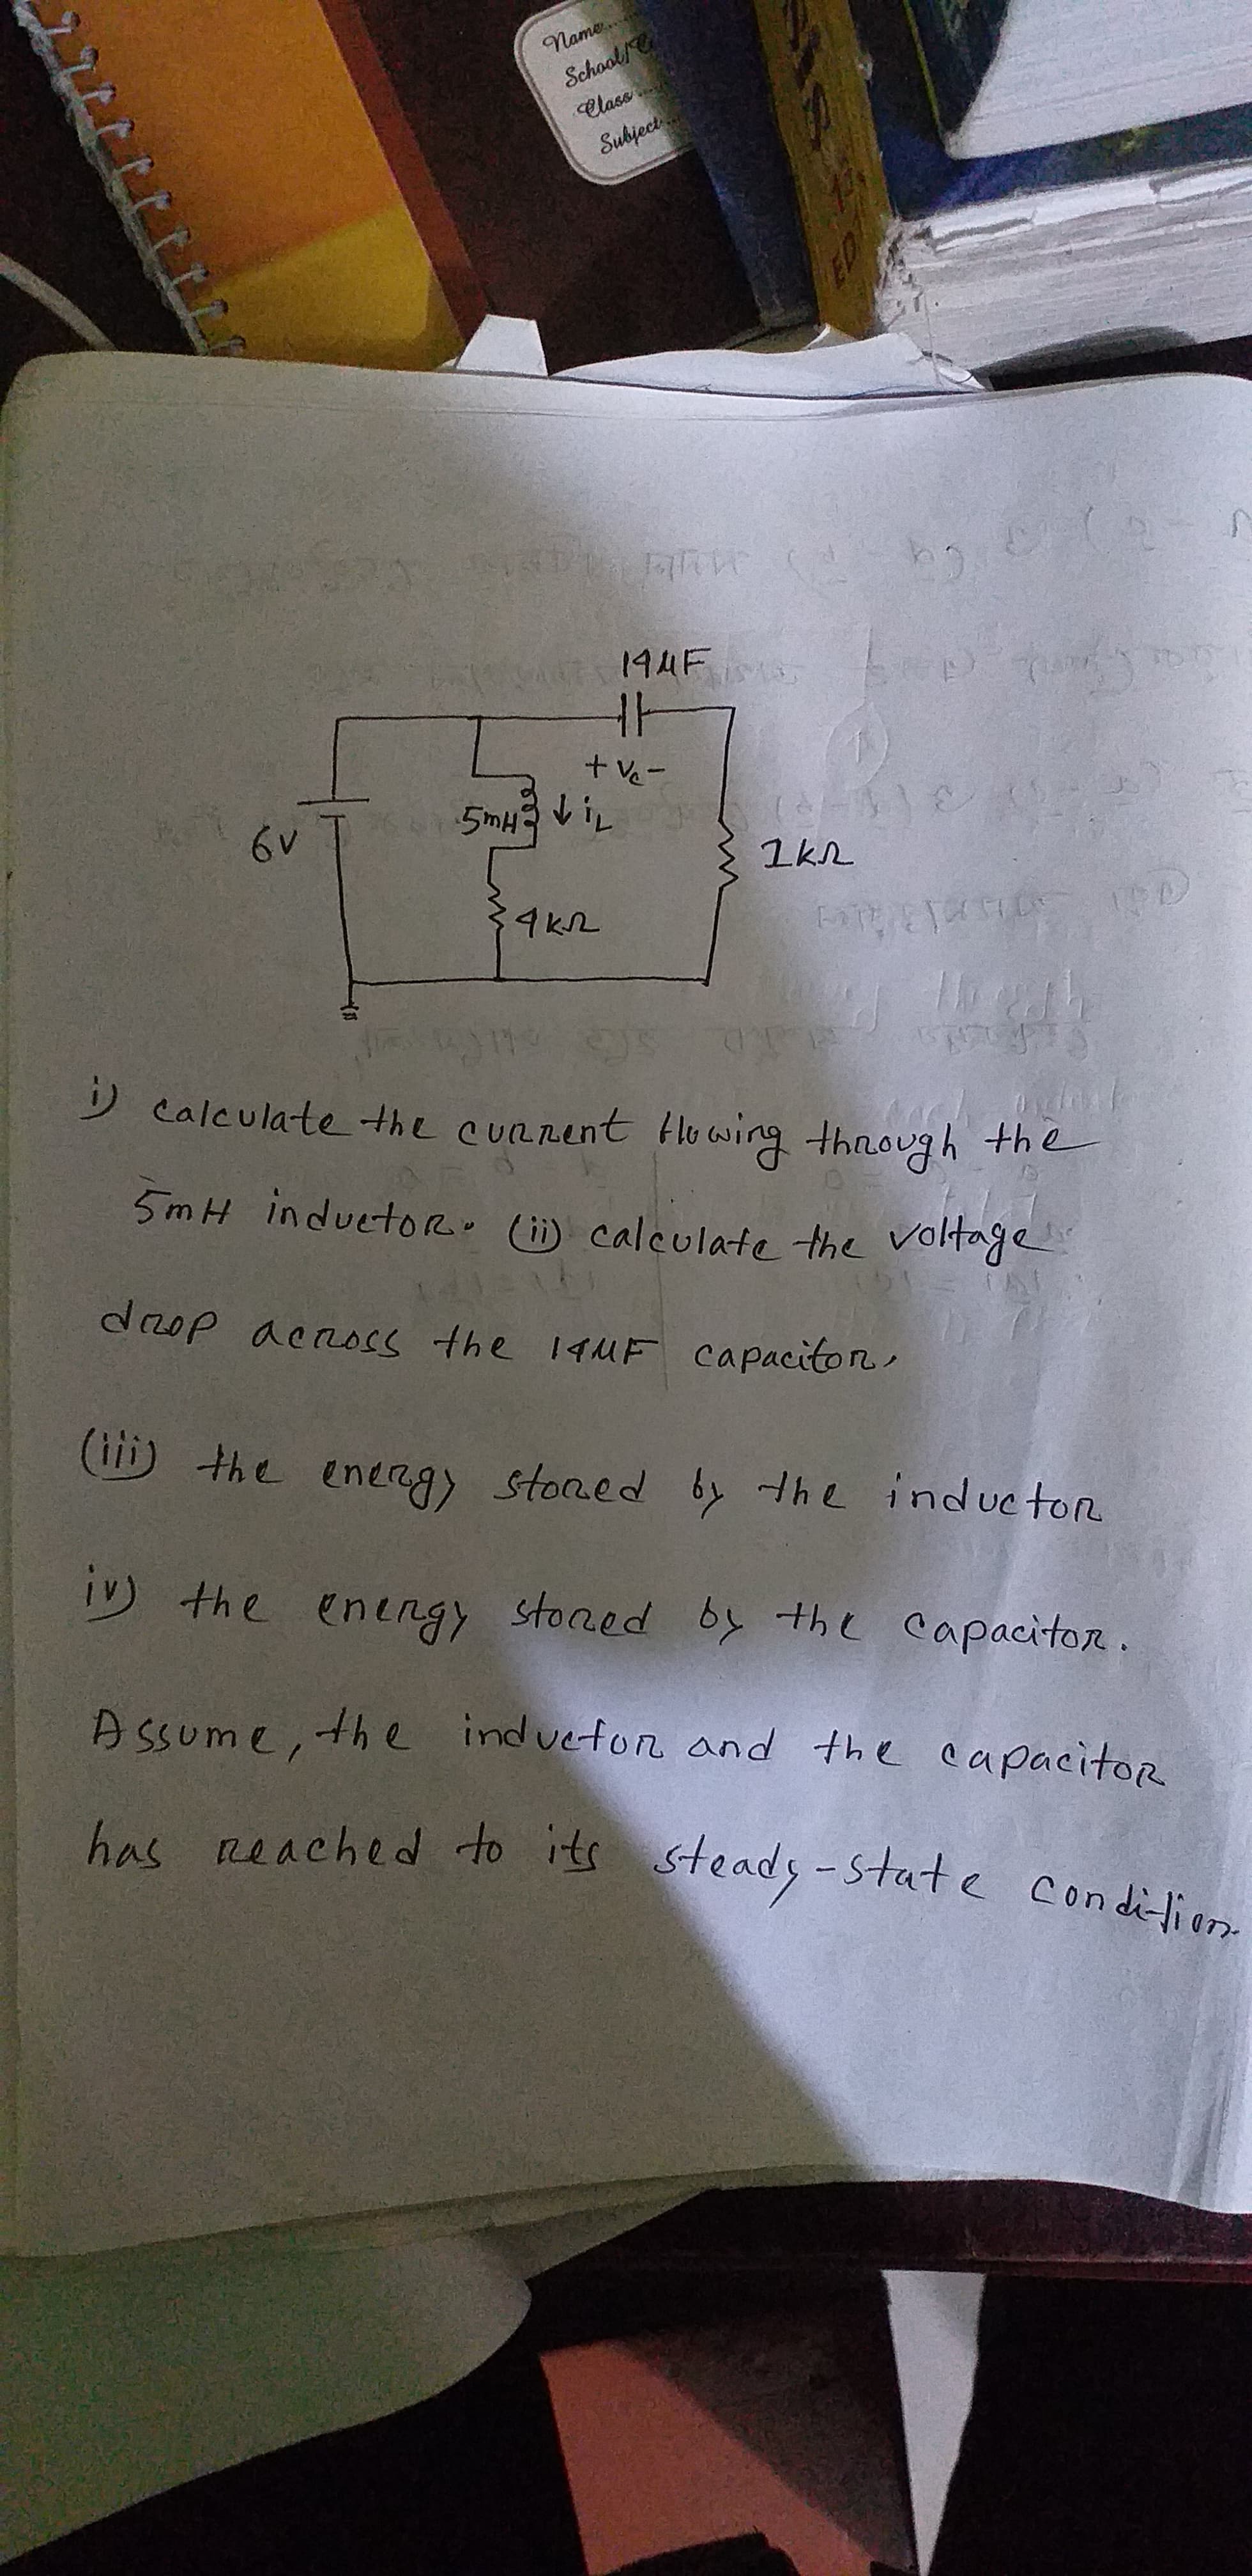 D calculate-the cuRrent Hlo wing through the
5mH induetoR (i) calculate the voltage
drop aerocs the 19MF capaciton,
